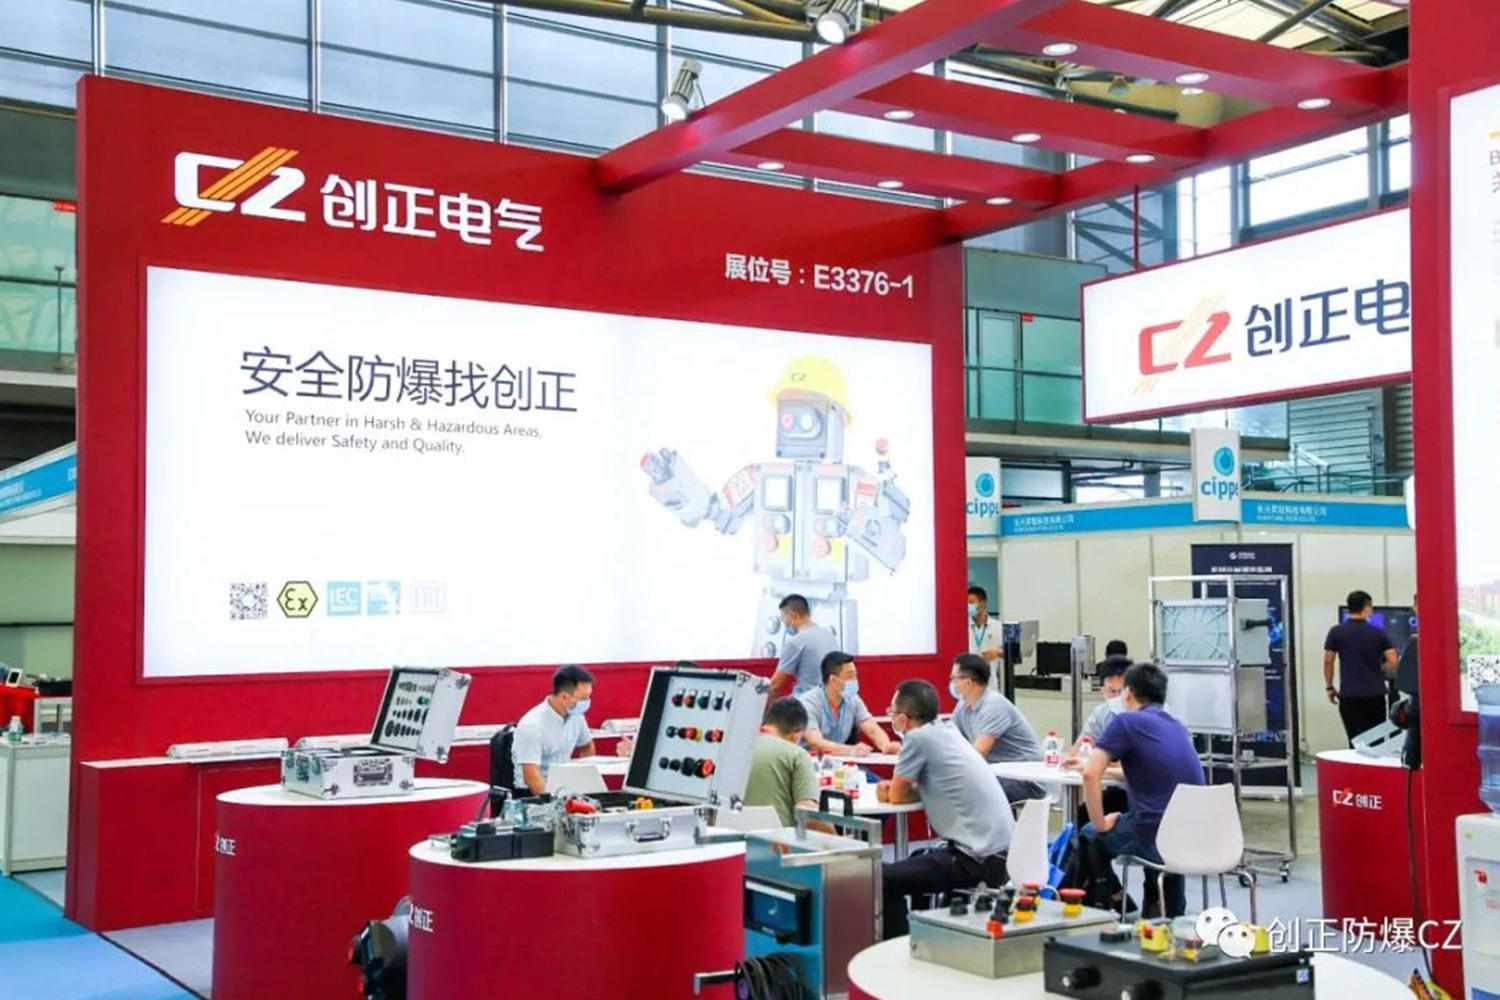 First show at the 2020 exhibition - Chuangzheng Electric brings new products to Cippe2020